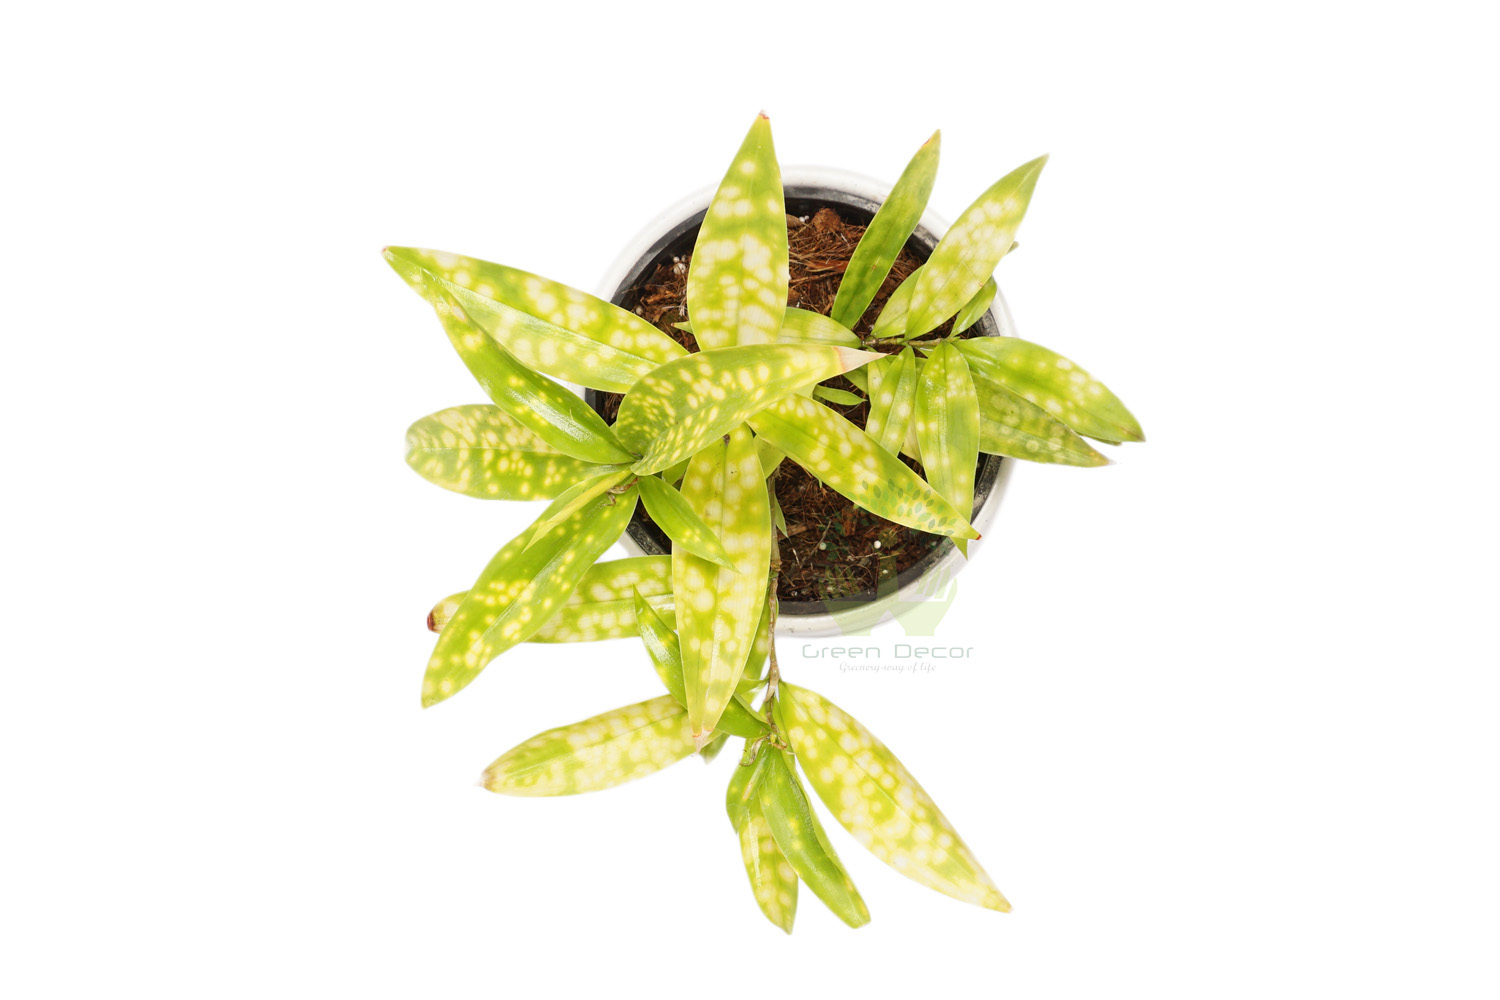 Buy Croton Codiaeum Plants , White Pots and seeds in Delhi NCR by the best online nursery shop Greendecor.